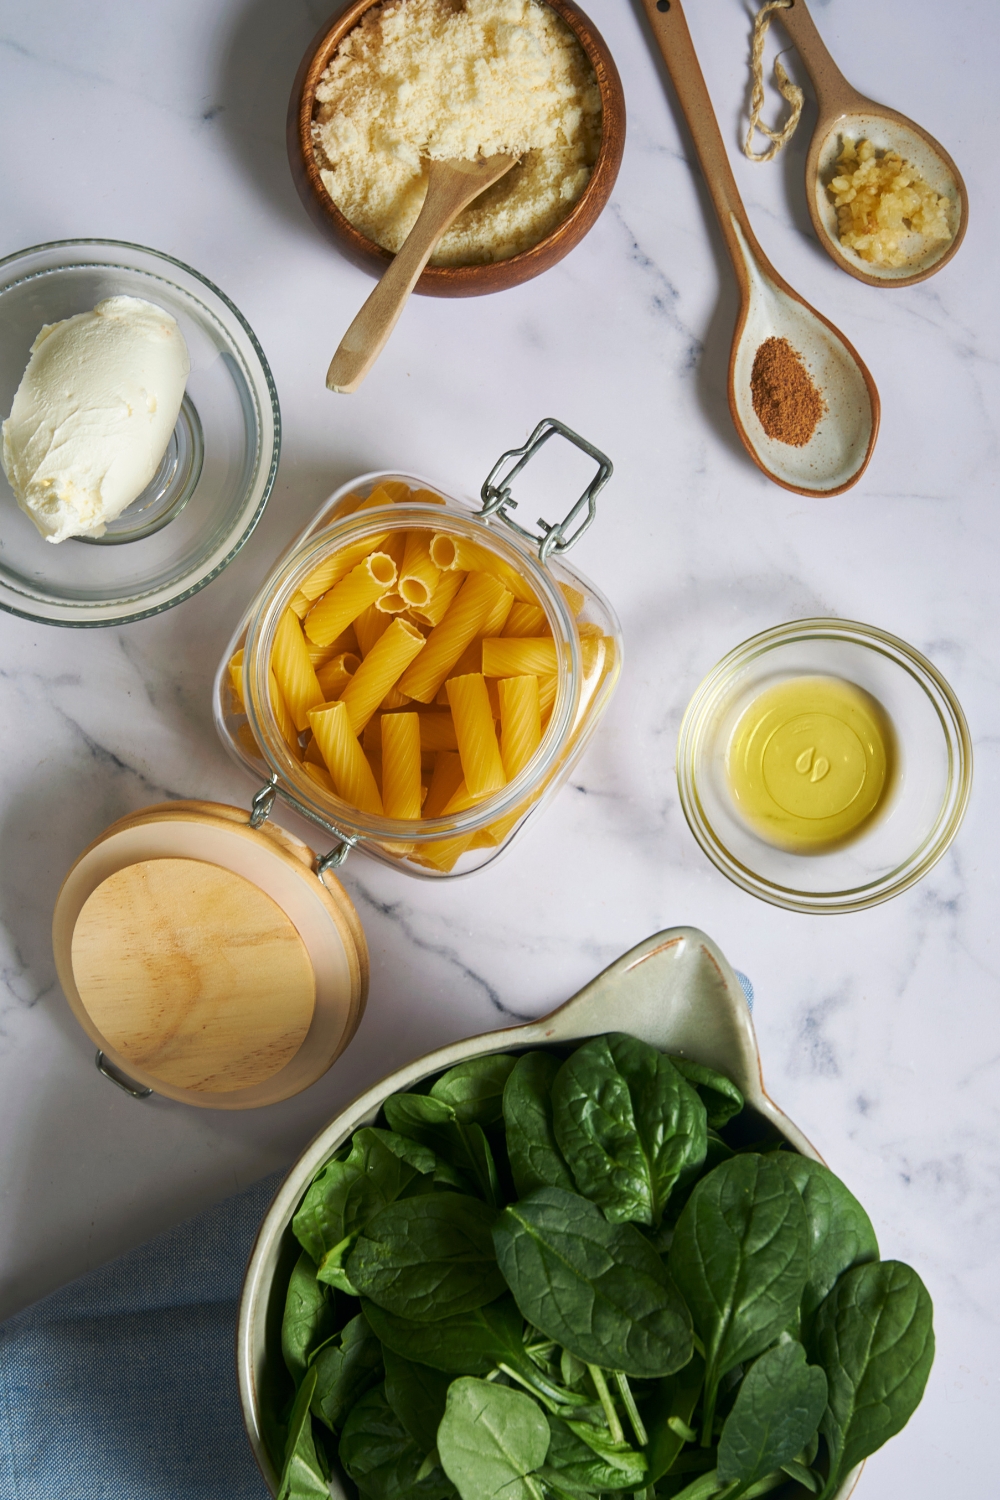 A countertop with the ingredients it takes to make spinach pasta.